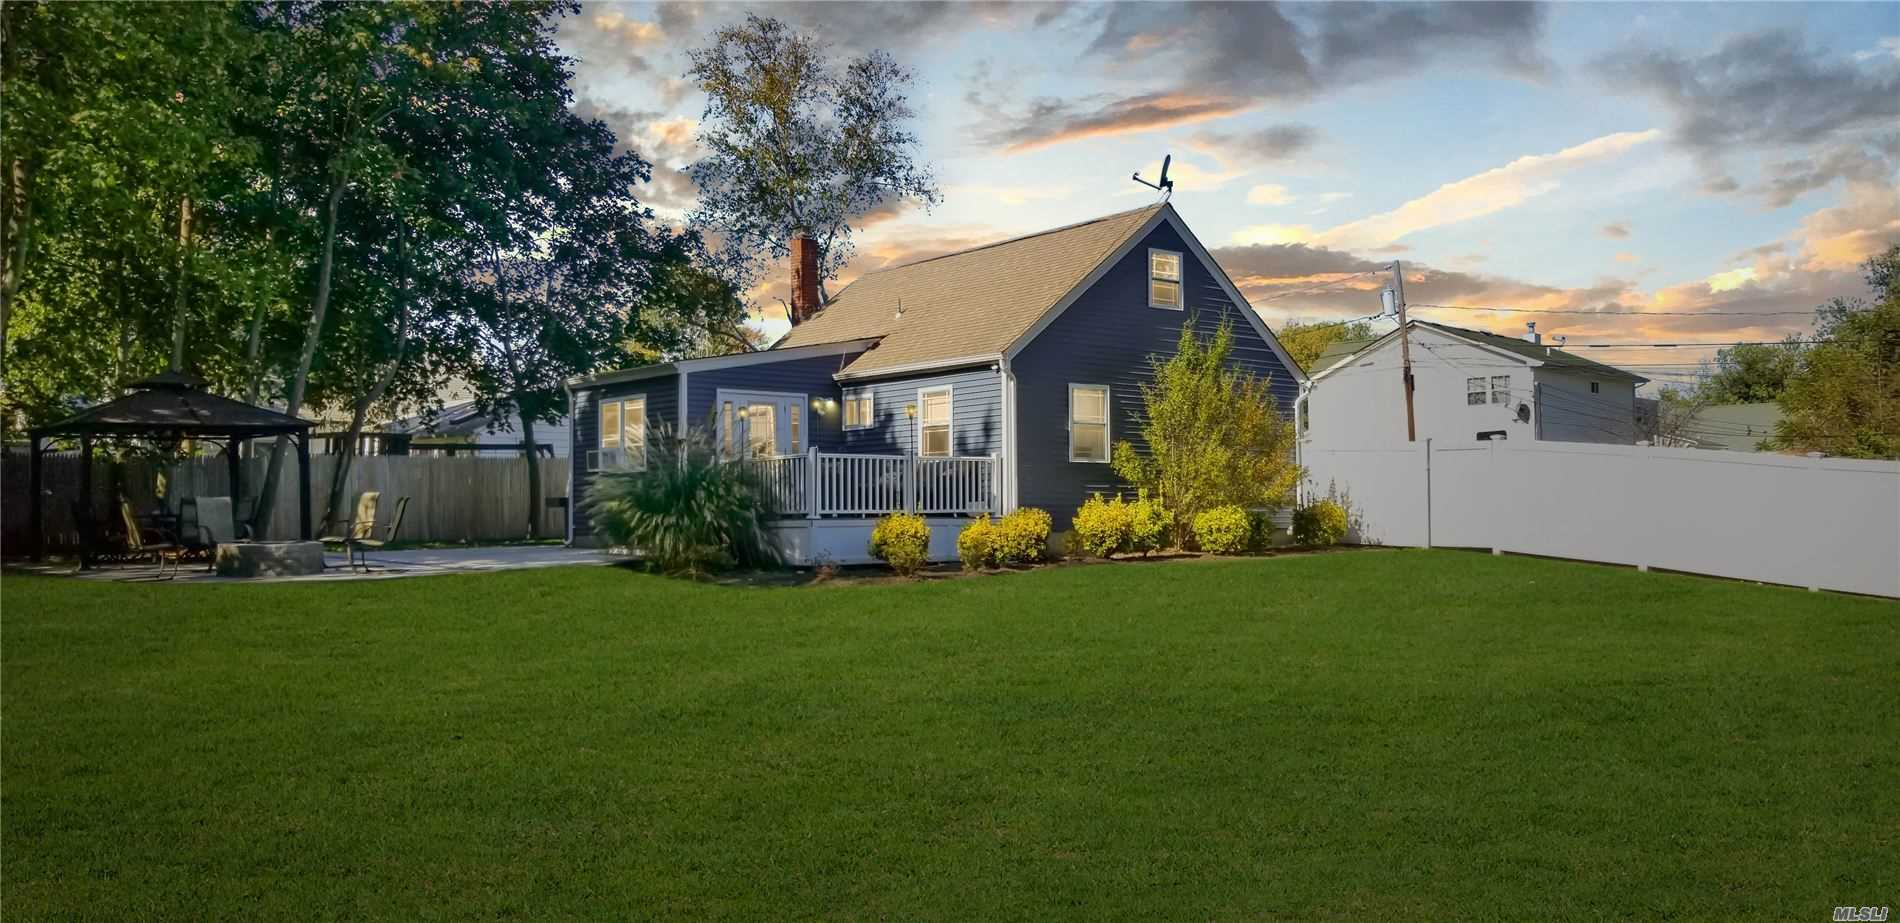 All Roads Lead To This PERFECT STARTER HOME!! This house was fully renovated 5 years ago Roof, Siding, Windows, Doors, Kitchen, Electric, and Bathroom. This house is in MINT Condition, Fire Pit, Trex Deck, Patio, Camera security system with Dvr play back!